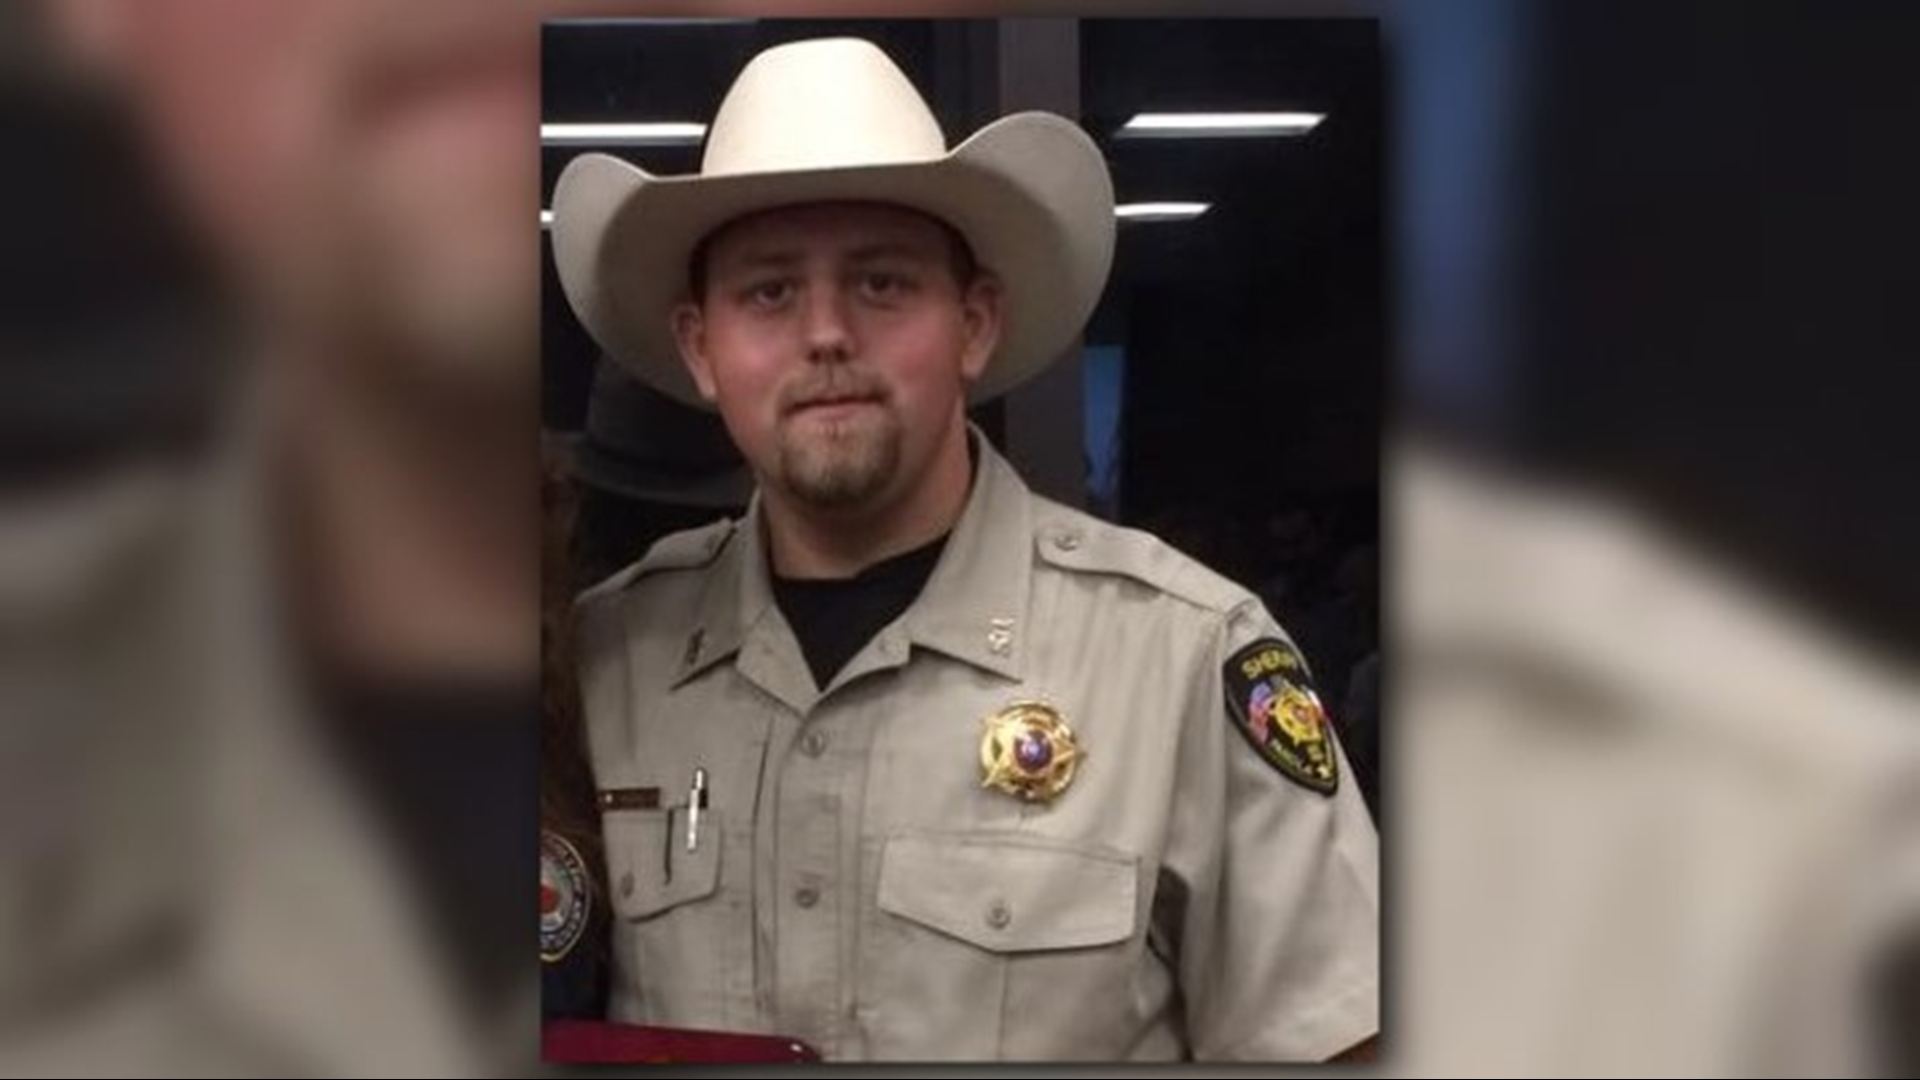 A Panola County deputy was shot and killed in the line of duty early Tuesday morning.